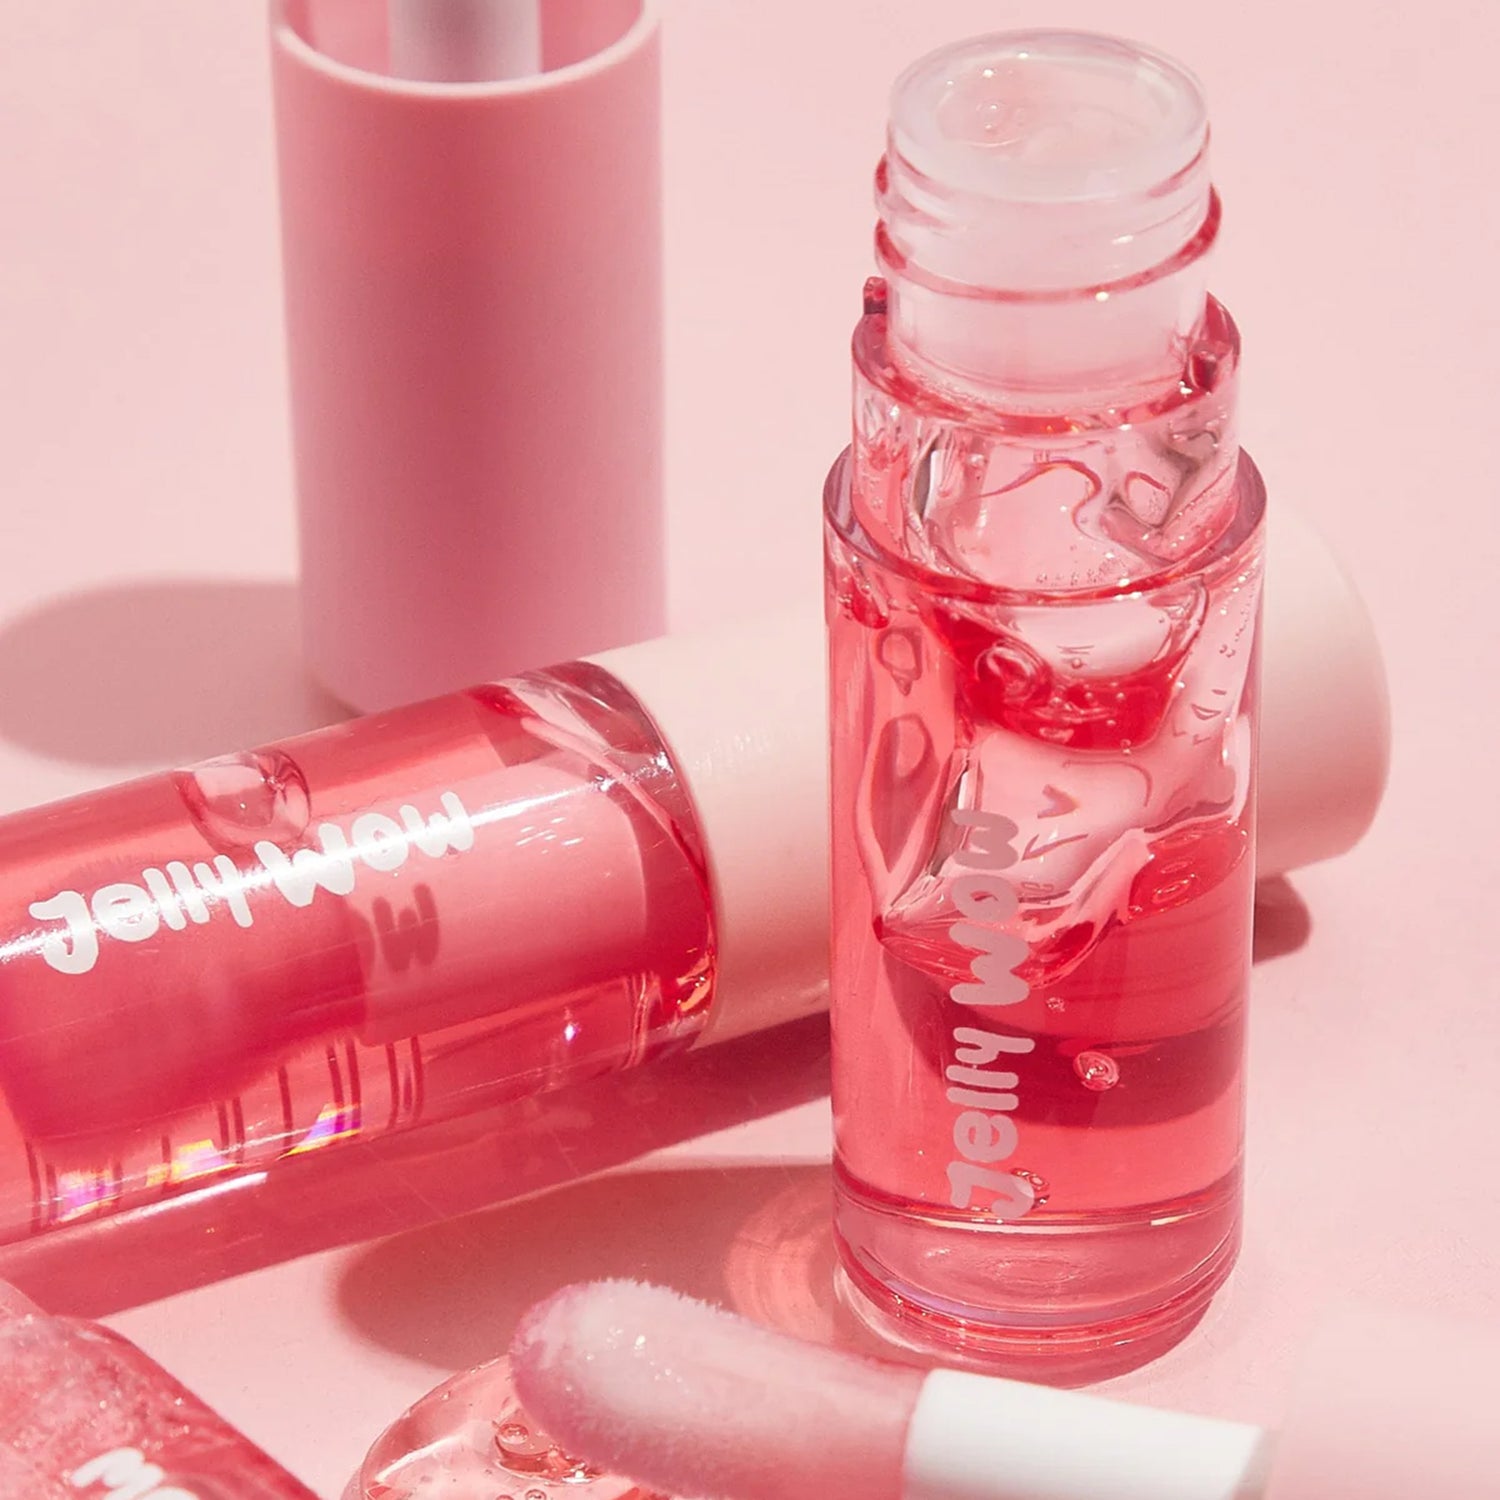 Jelly Wow Hydrating Lip Oil